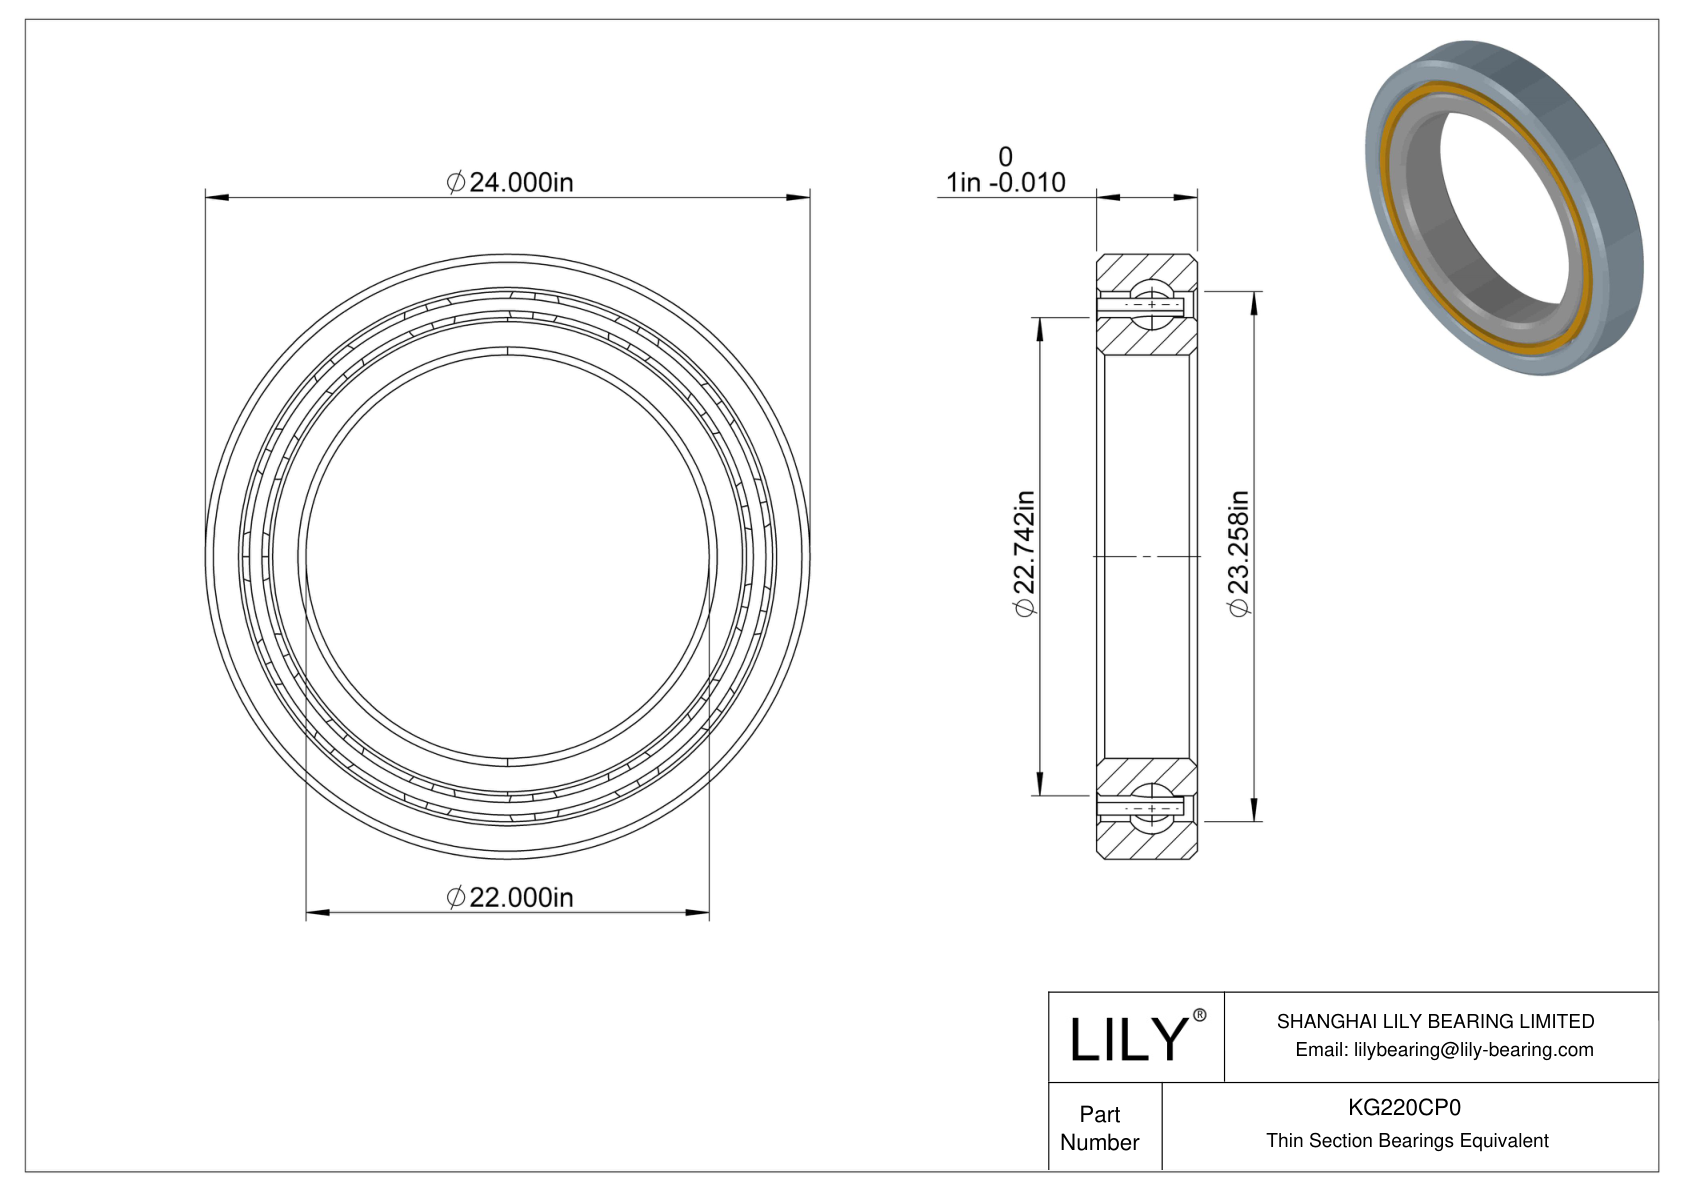 KG220CP0 Constant Section (CS) Bearings cad drawing